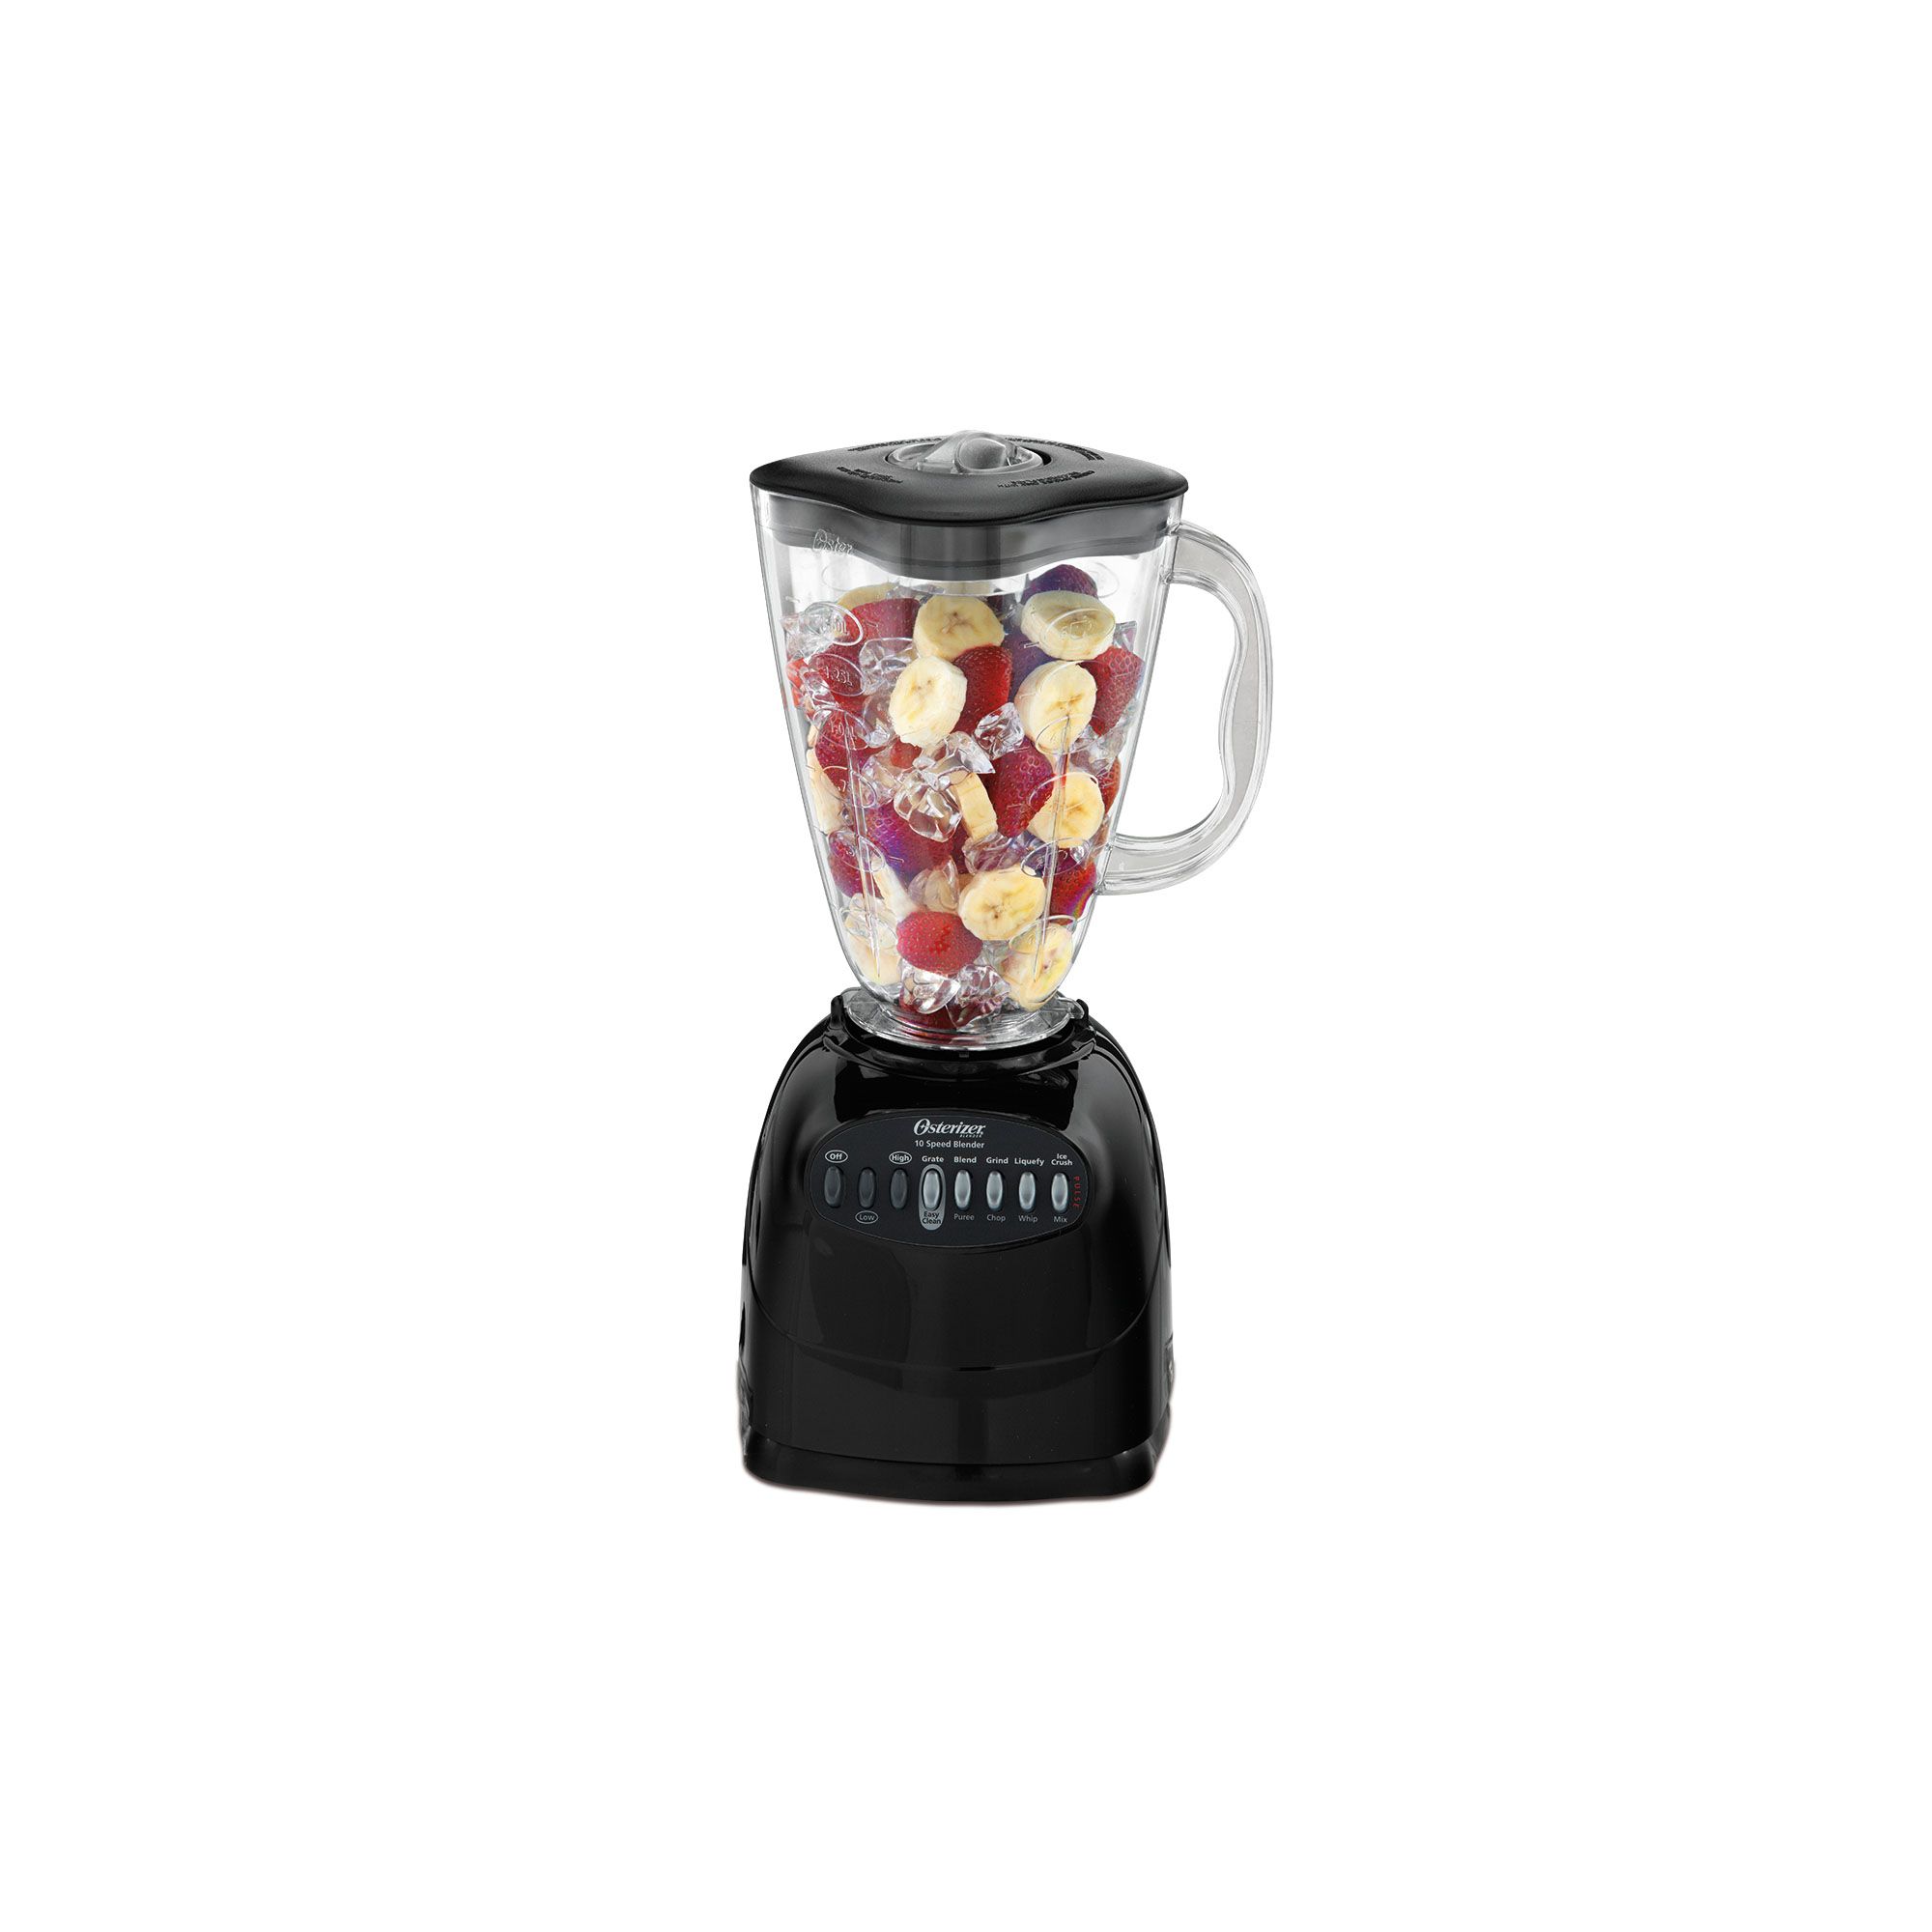 Oster® Easy-to-Clean Smoothie Blender with Dishwasher-Safe Glass